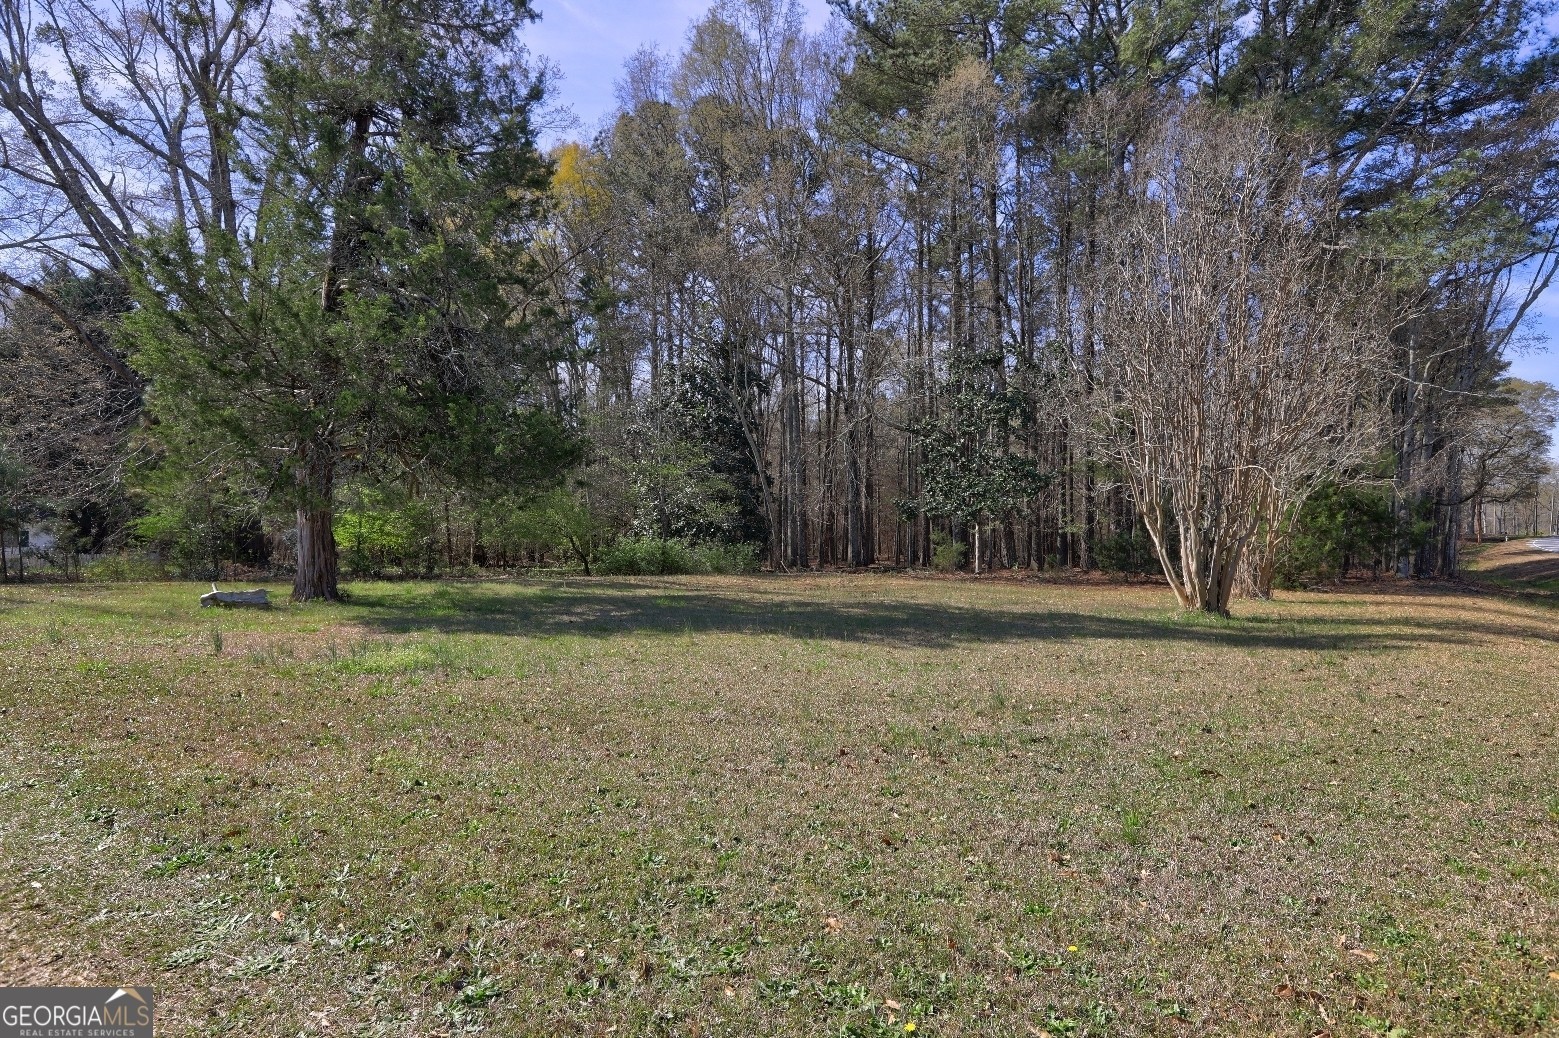 4. 205 Highway 186 Tract 1